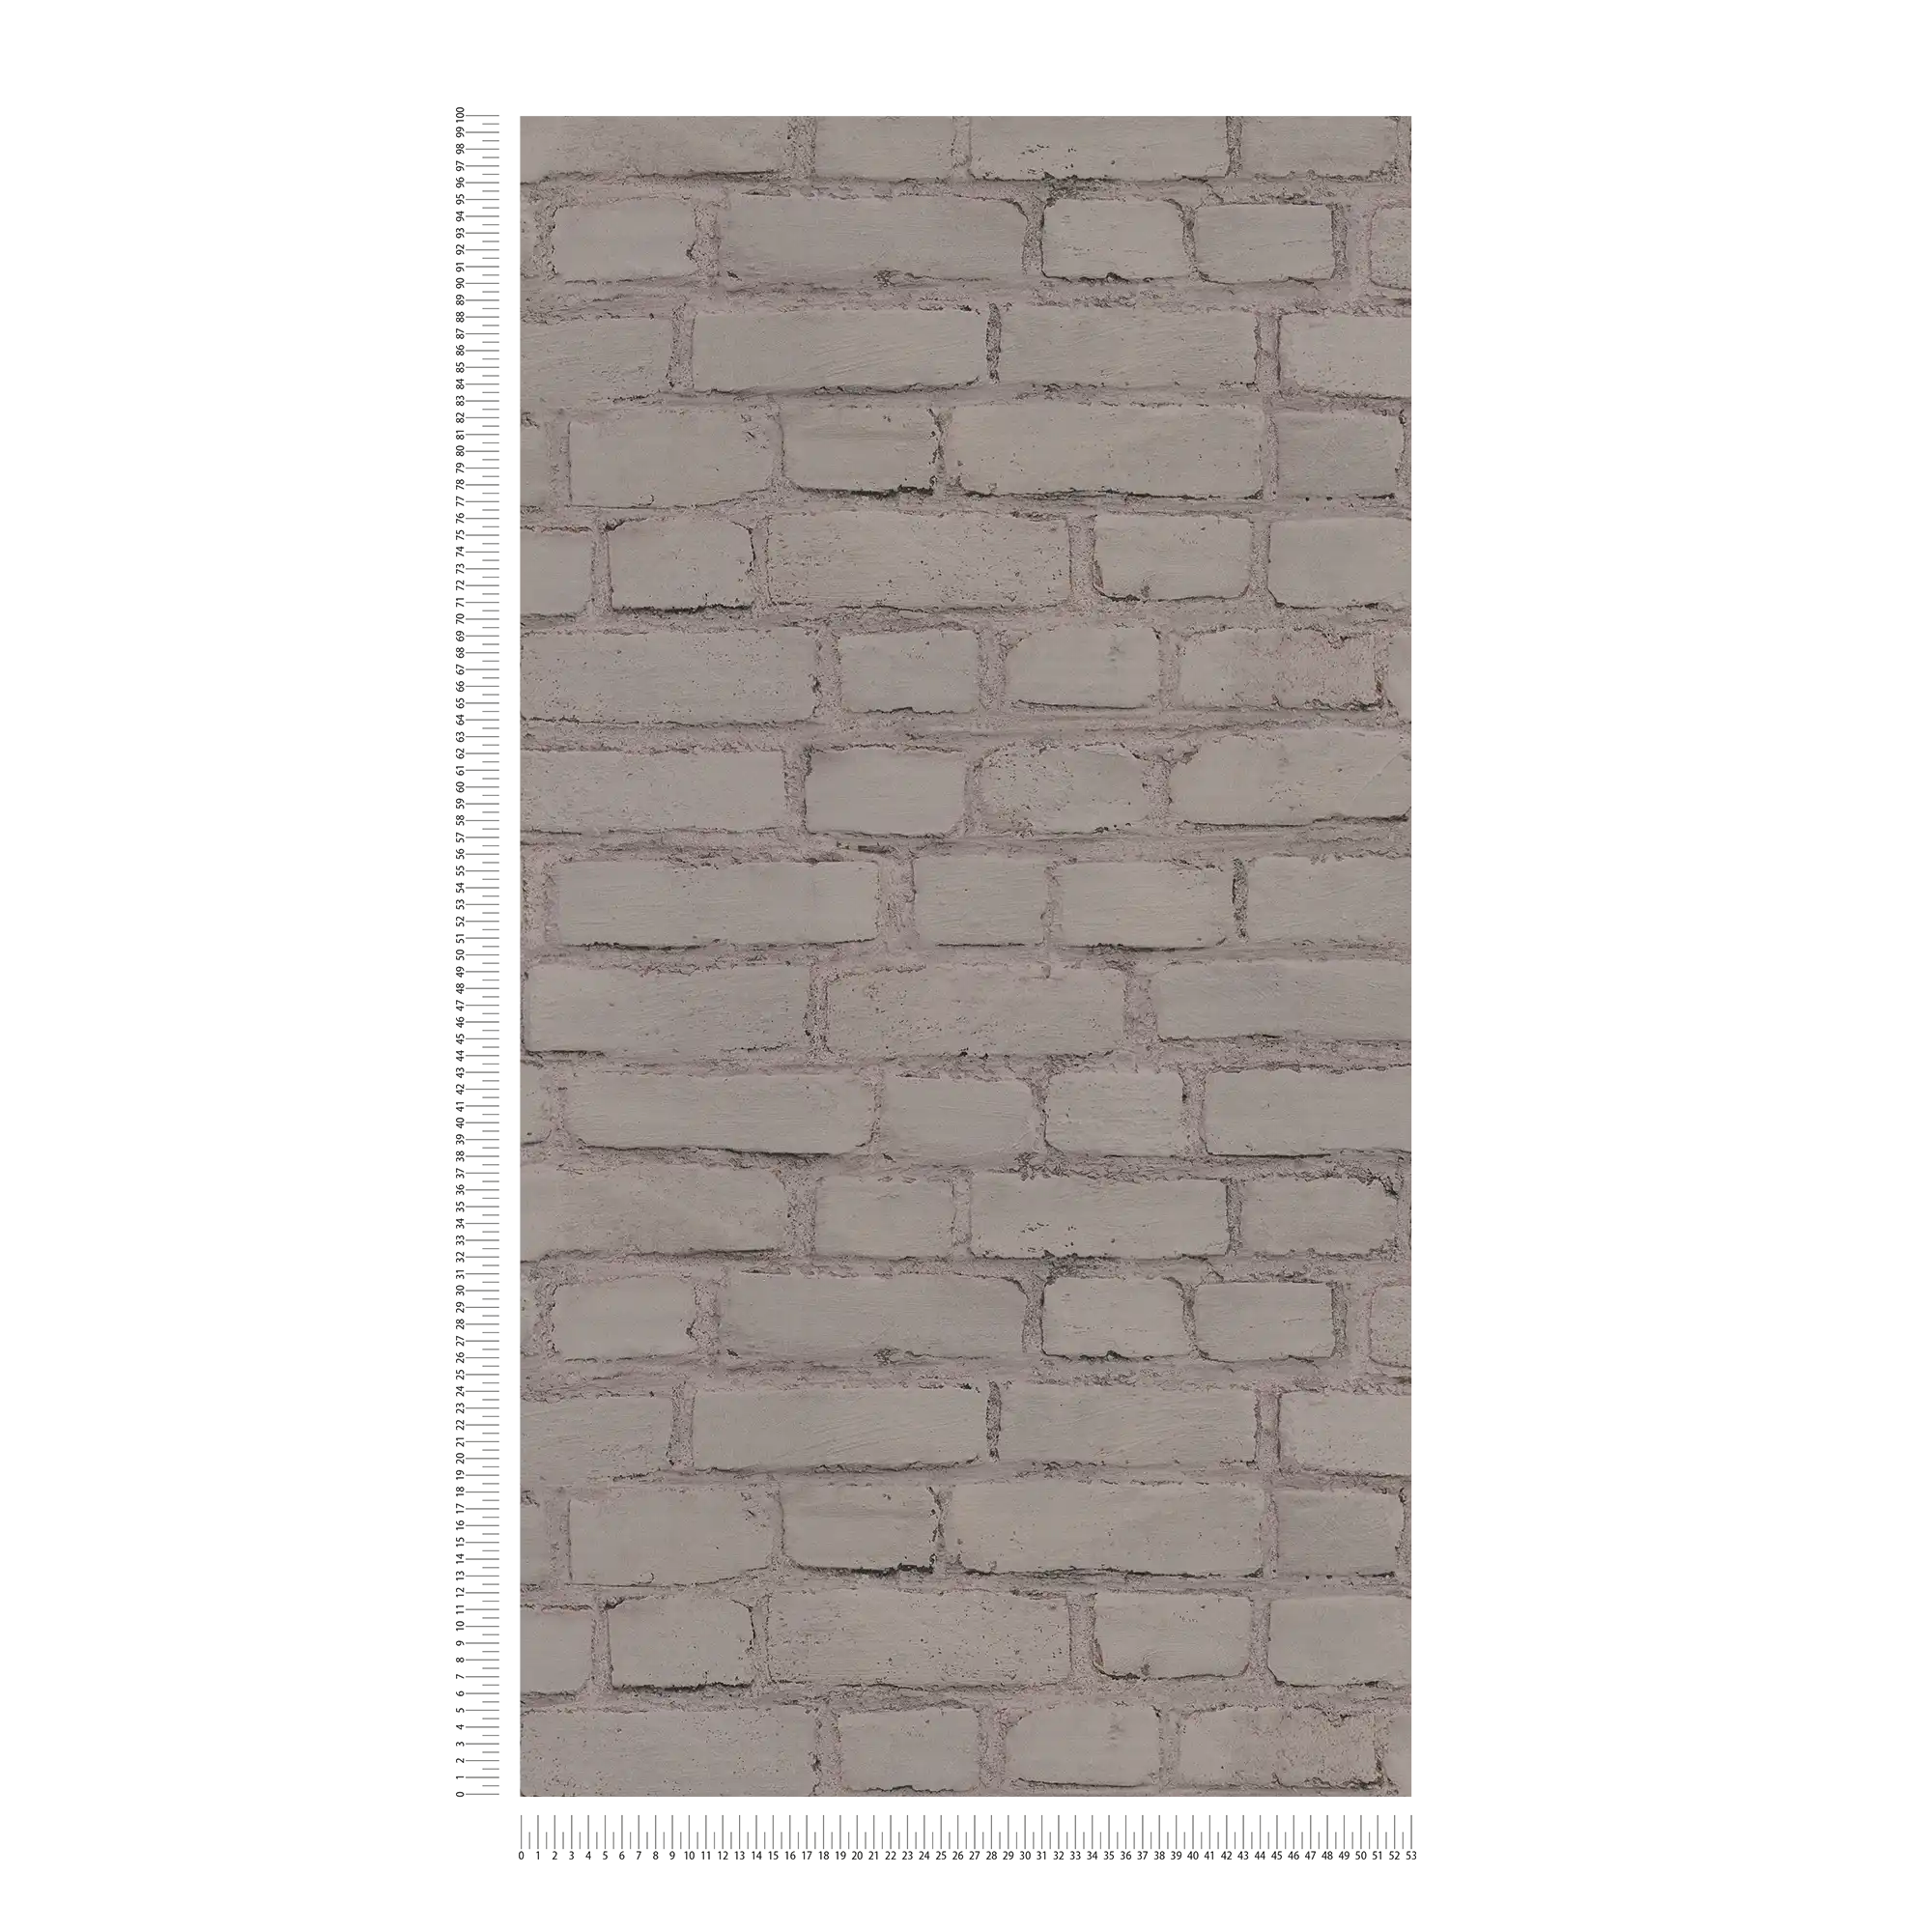             Stone wallpaper wall in clinker look - grey, taupe
        